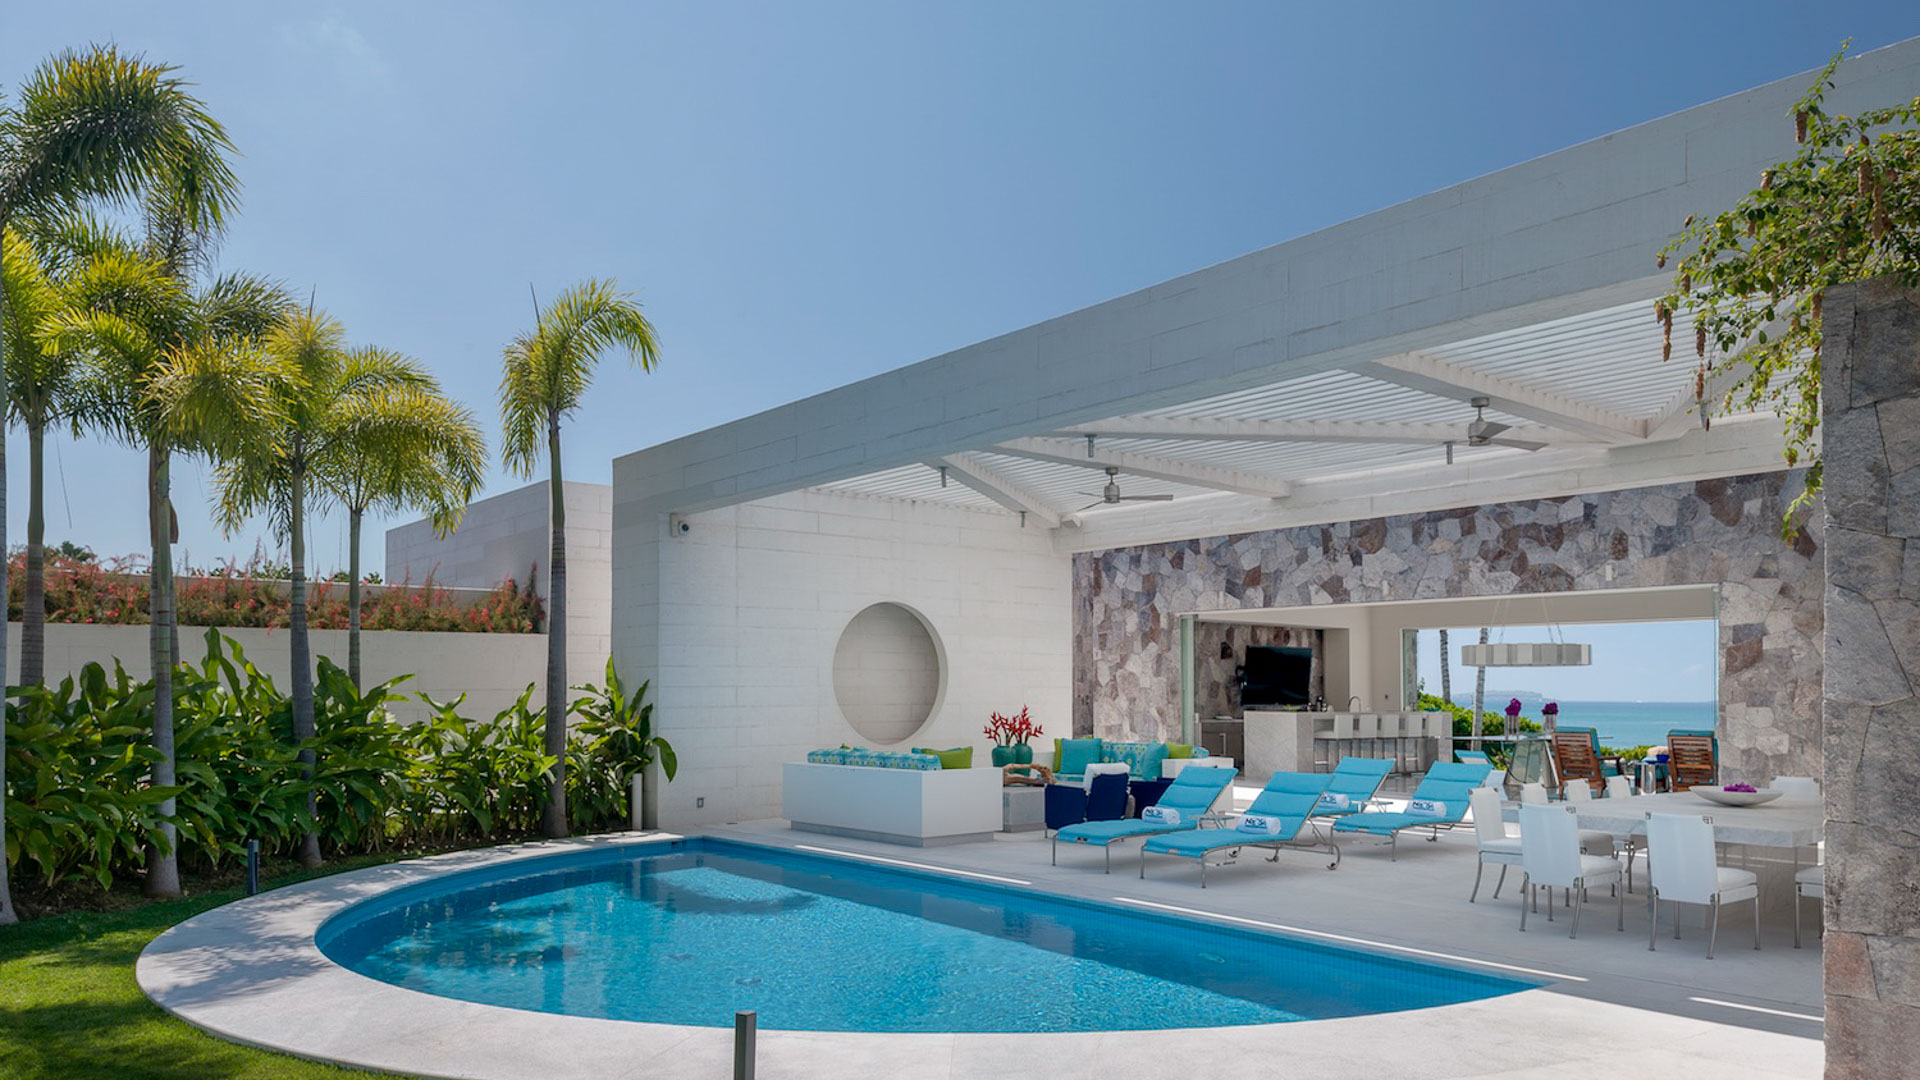 Property Image 2 - Youthful and Pop-arty Oceanfront Villa with Two Pools